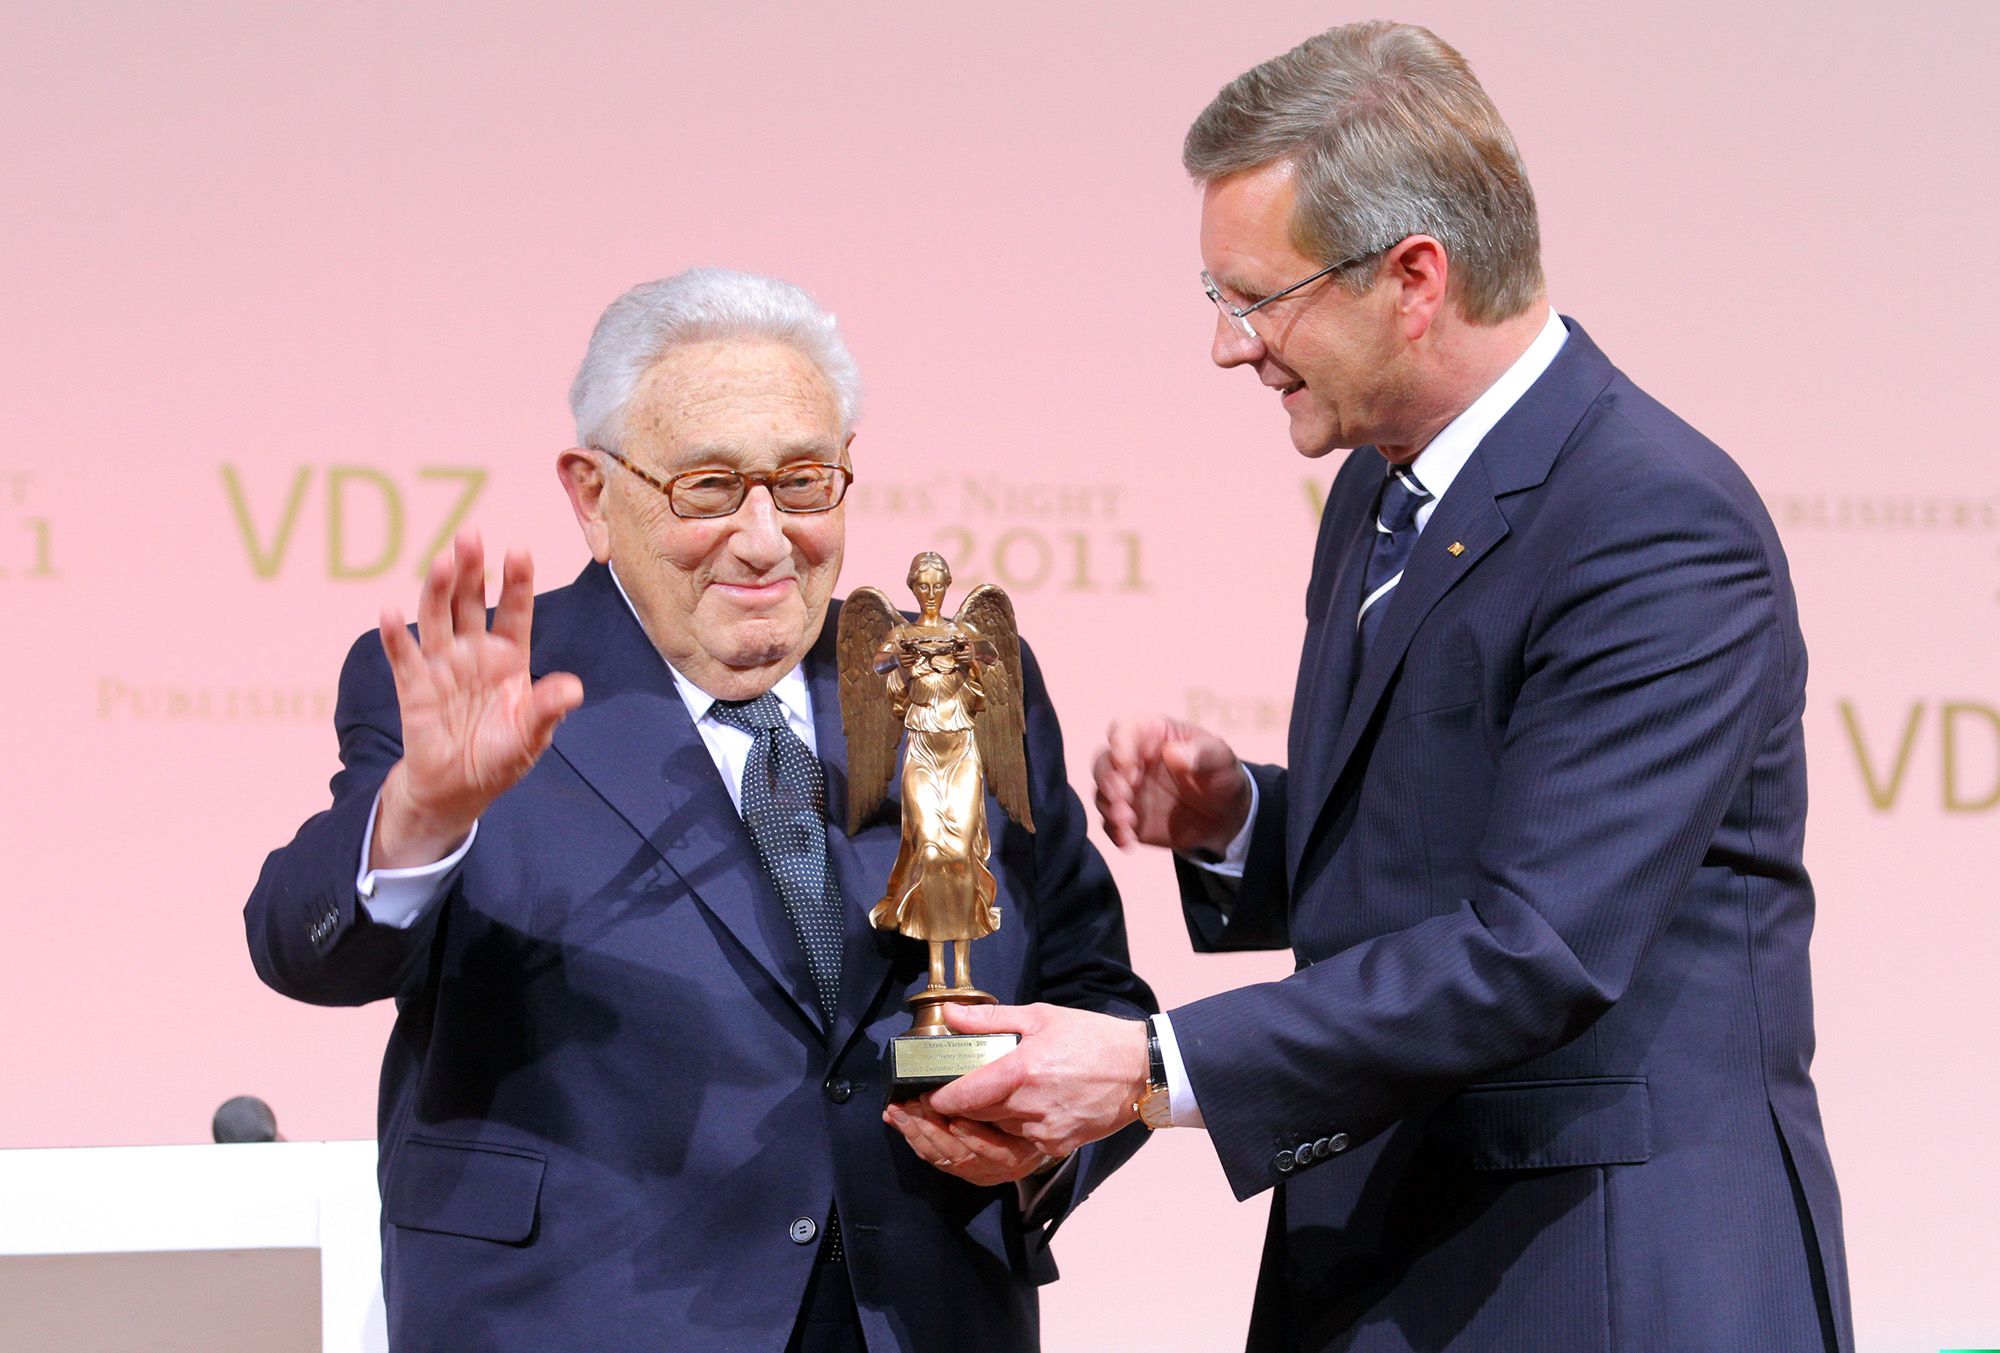 Kissinger receives a Golden Victoria Award from German President Christian Wulff in Berlin in 2011.